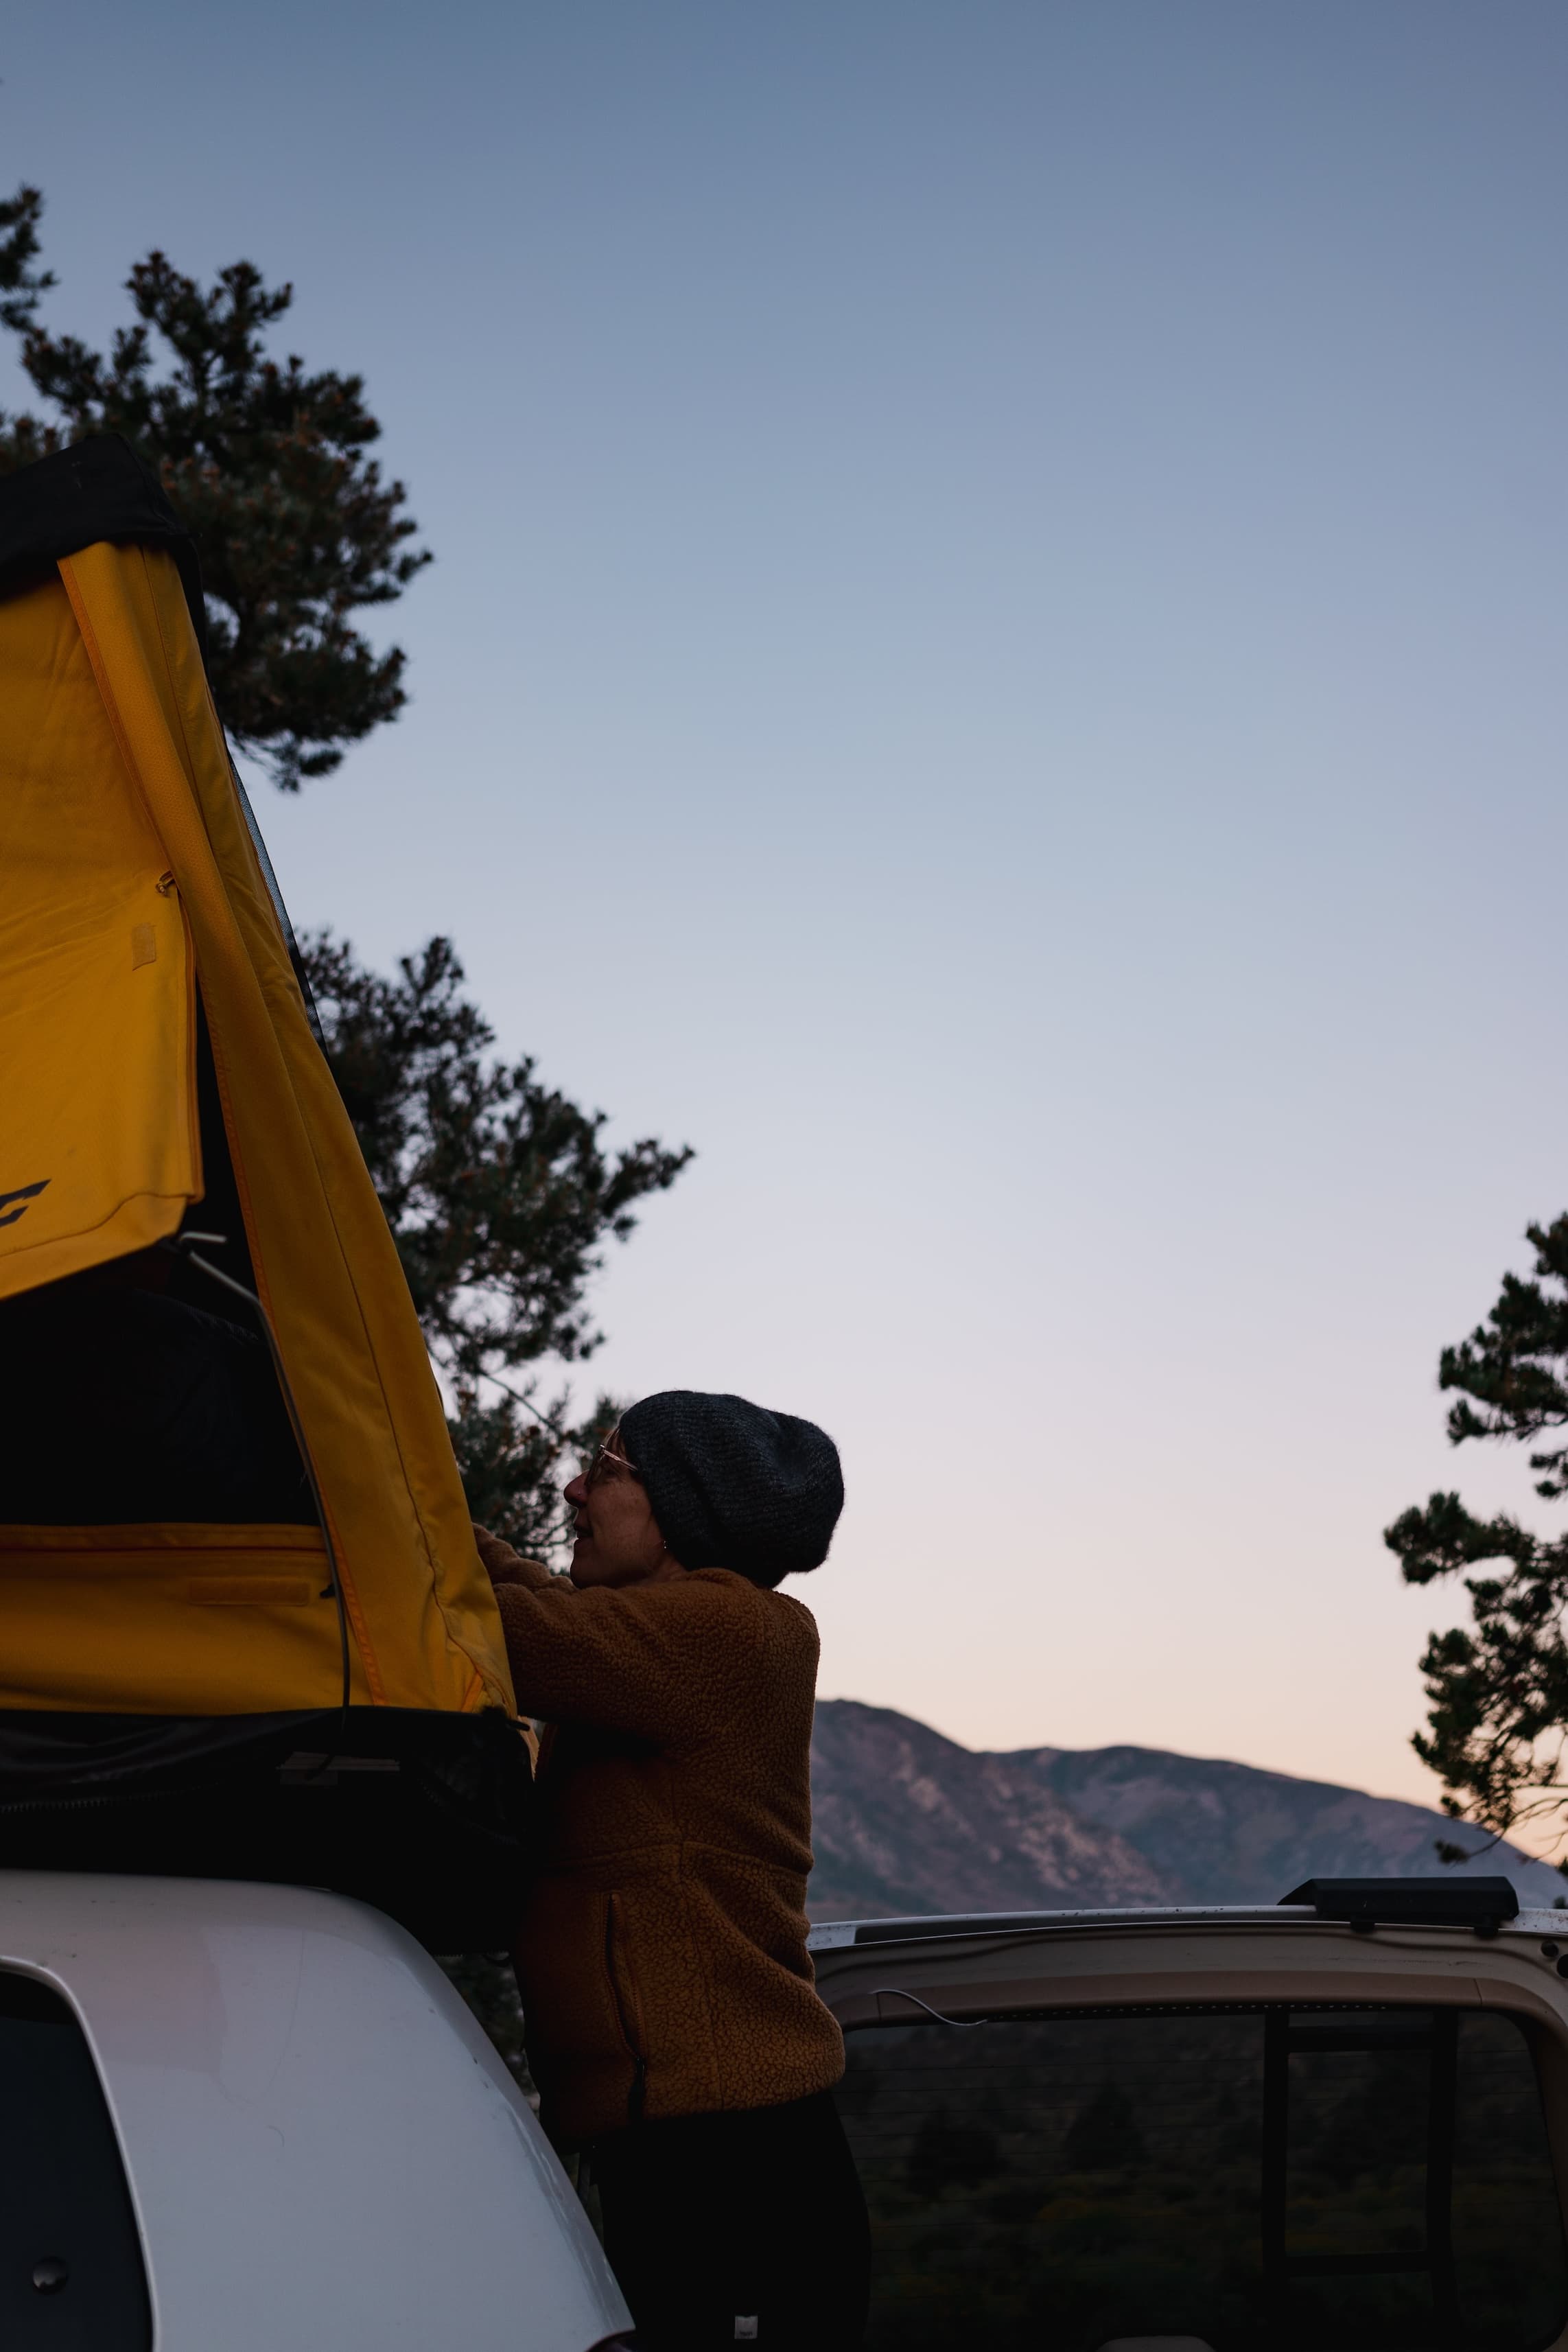 A woman, Jen, in a brown jacket and grey beanie setting up a yellow rooftop tent on a vehicle, with a backdrop of trees and mountains in the twilight.